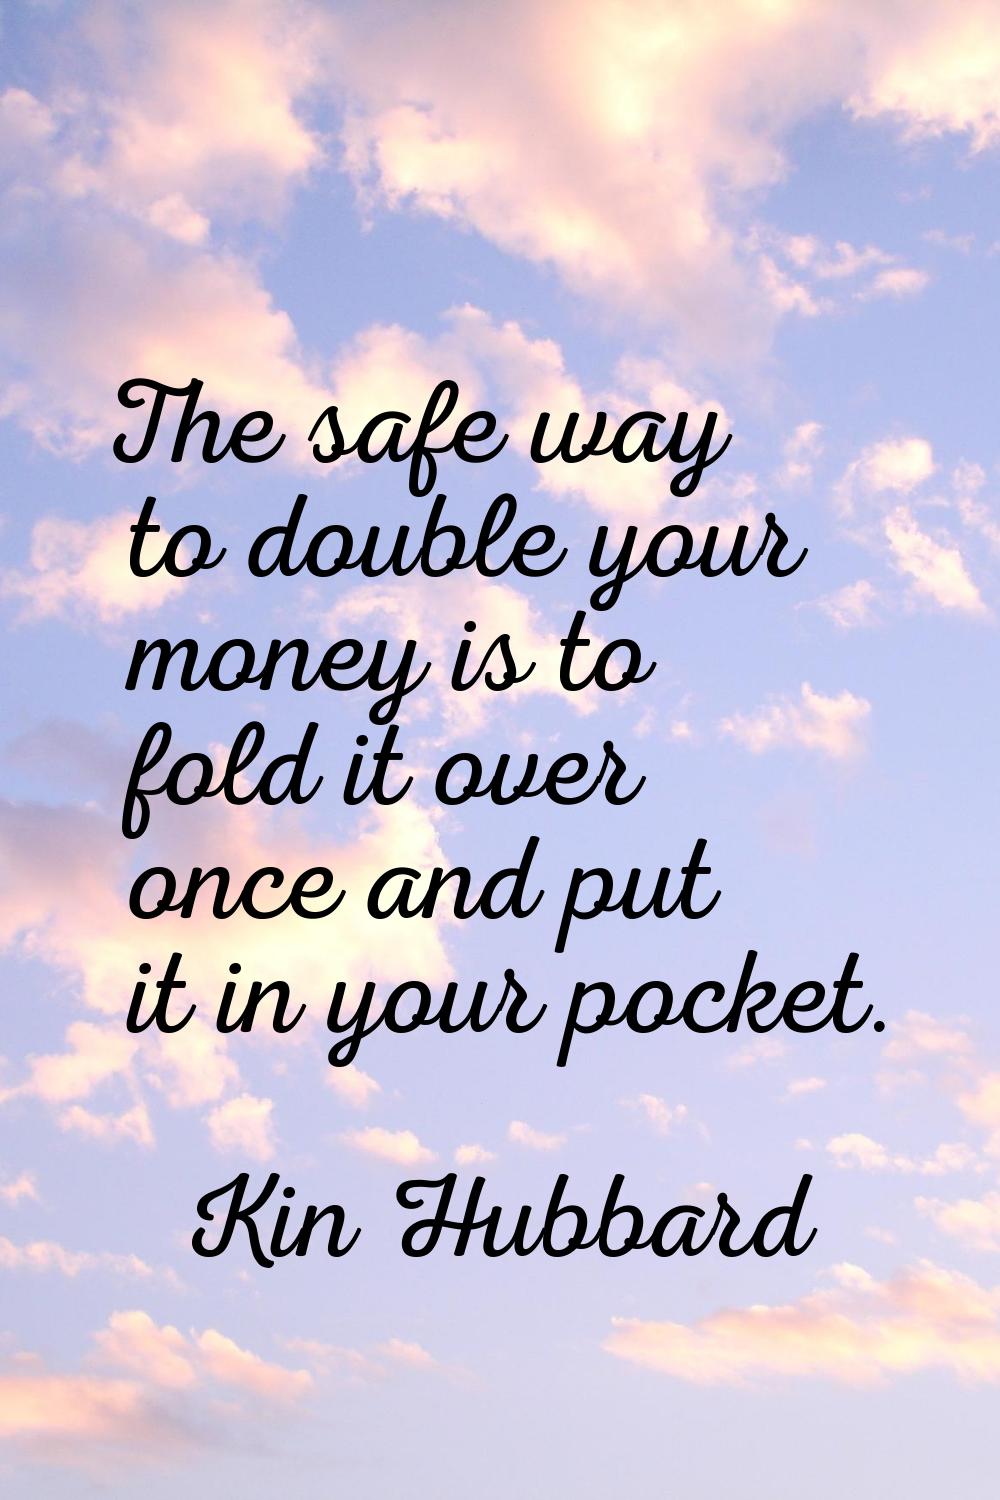 The safe way to double your money is to fold it over once and put it in your pocket.